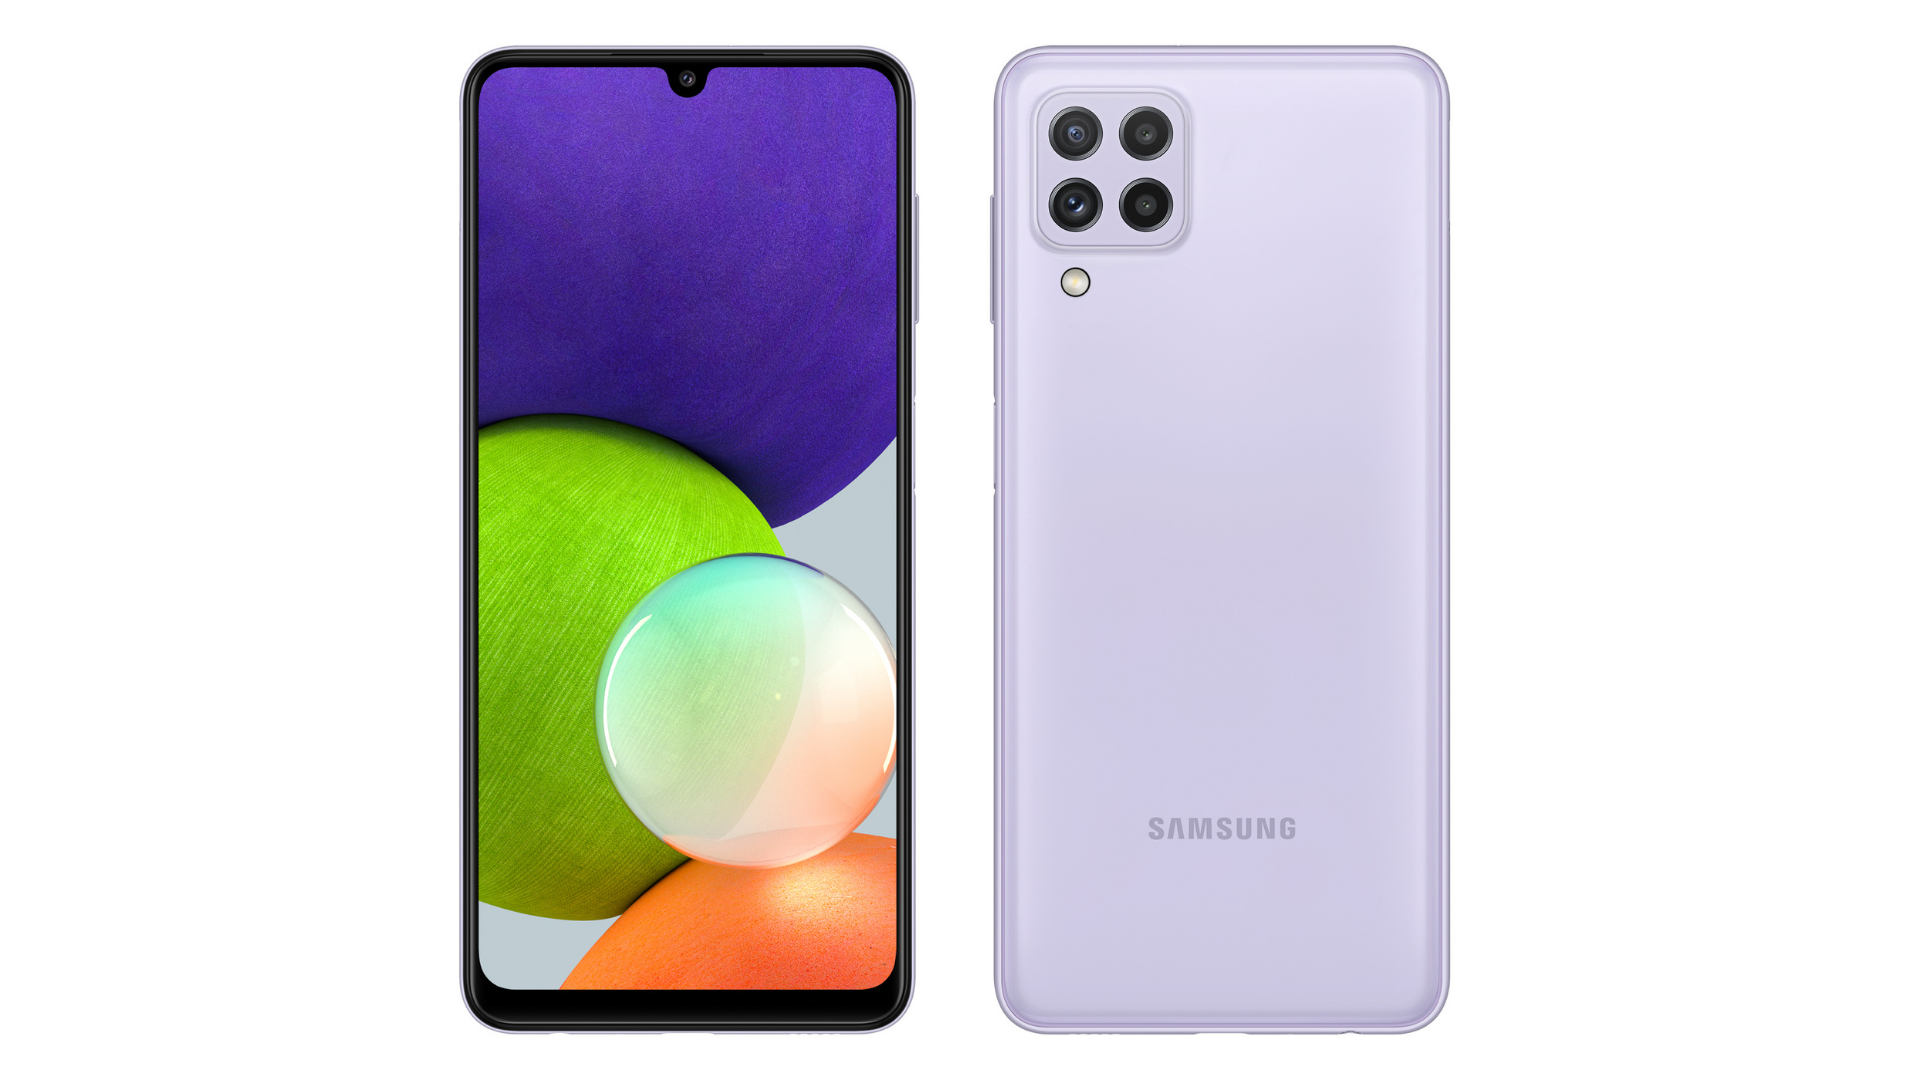 Galaxy A22 launches with 90Hz display and 48MP quad camera | Cell